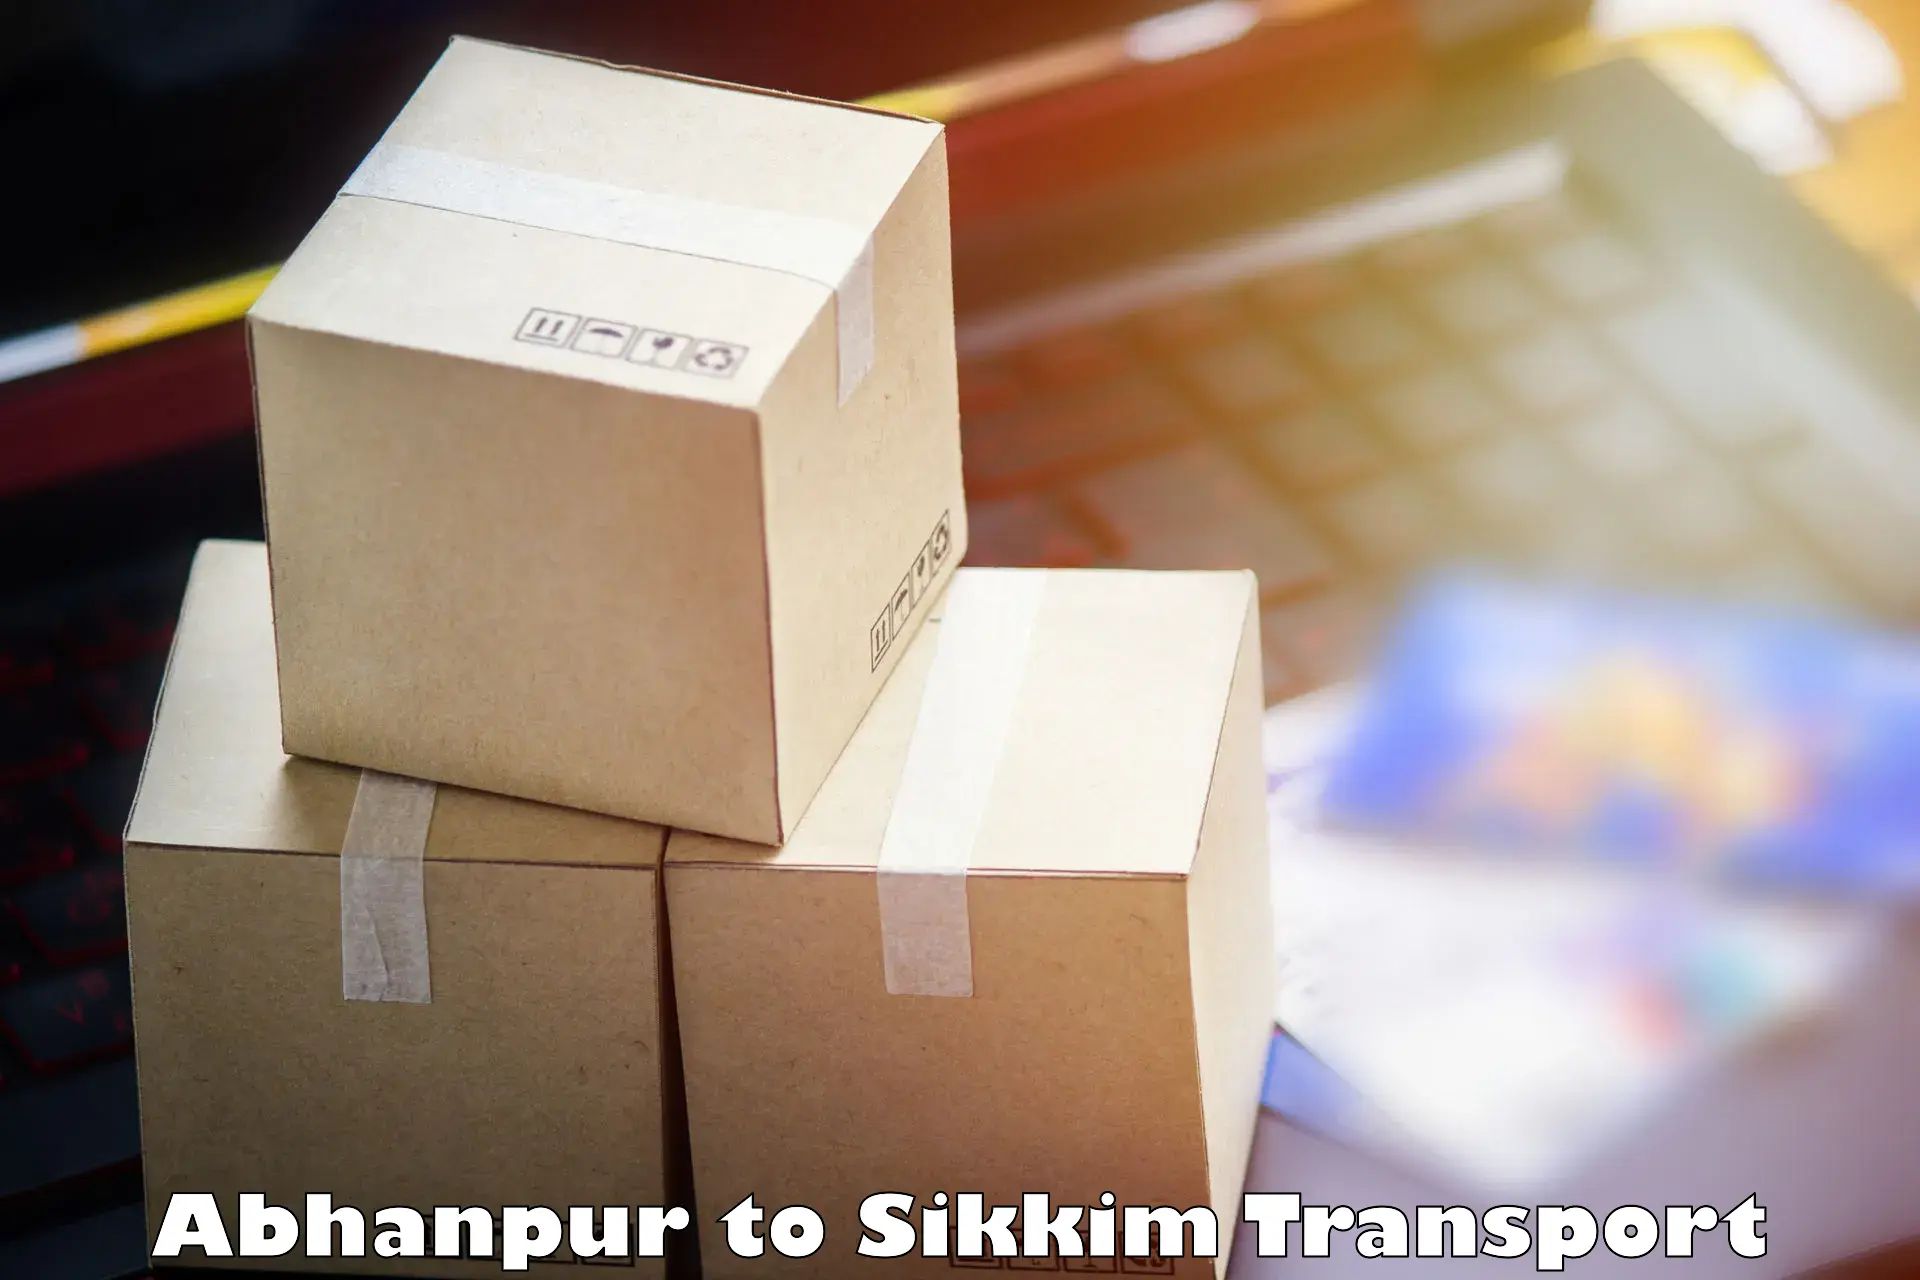 Parcel transport services Abhanpur to West Sikkim